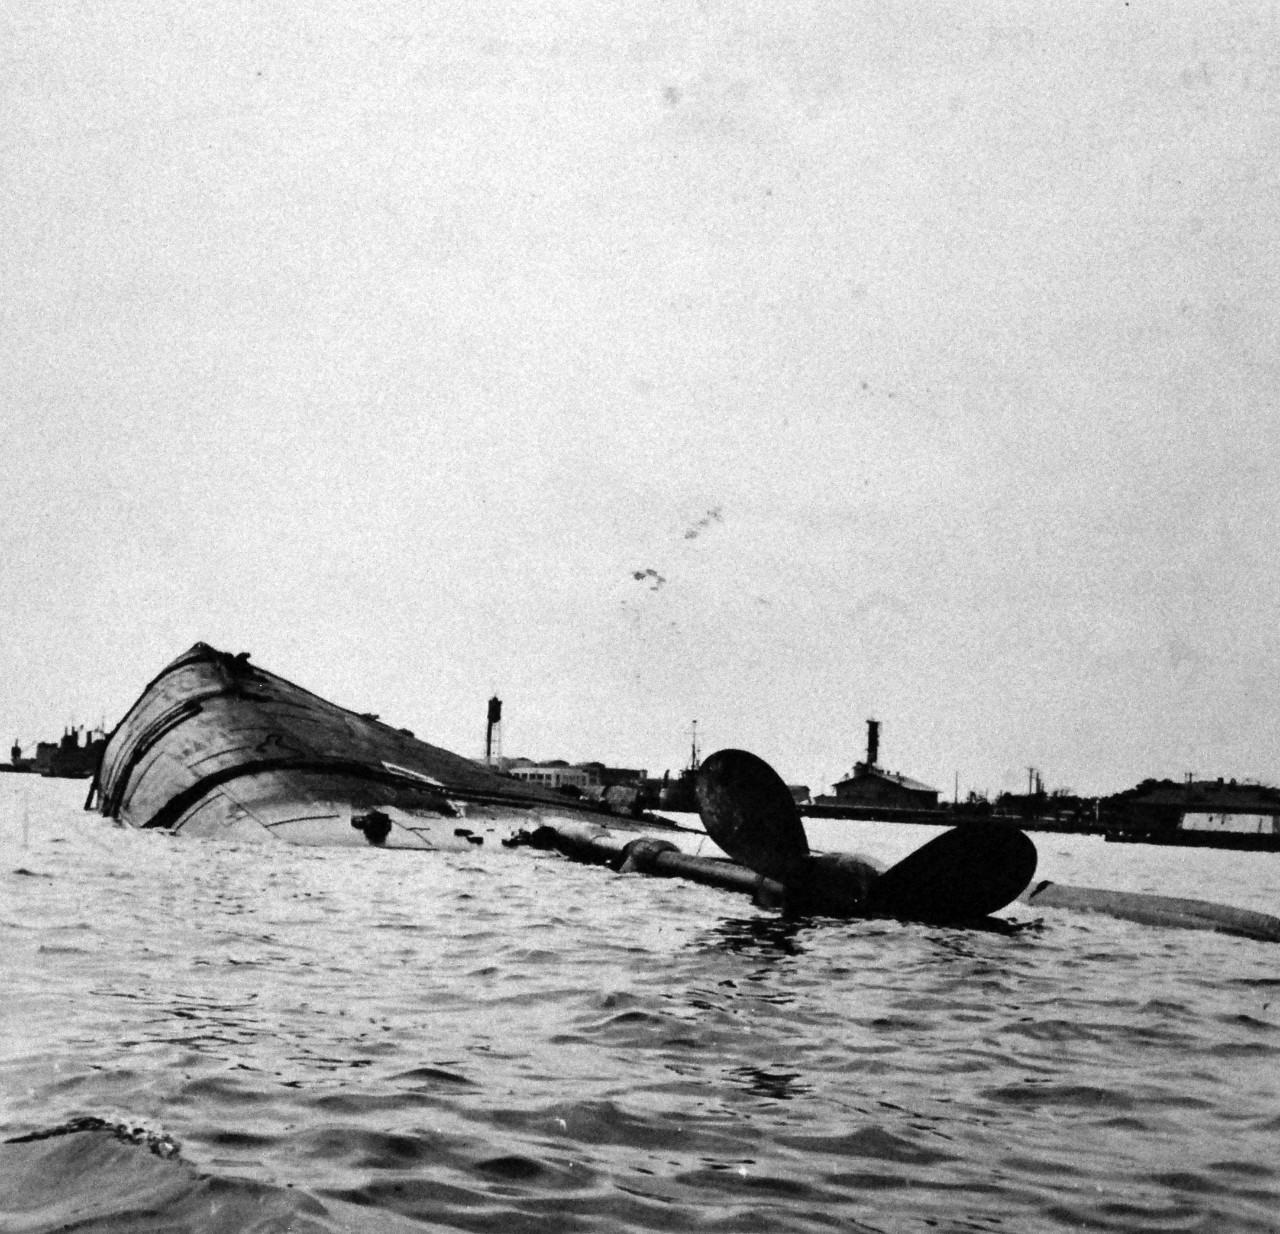 80-G-182699:  Japanese Attack on Pearl Harbor Attack, 7 December 1941 Japanese Attack on Pearl Harbor, December 7, 1941.   The capsized USS Oklahoma (BB 37) is shown after the attack. U.S. Navy photograph, now in the collections of the National Archives (9/9/2015).